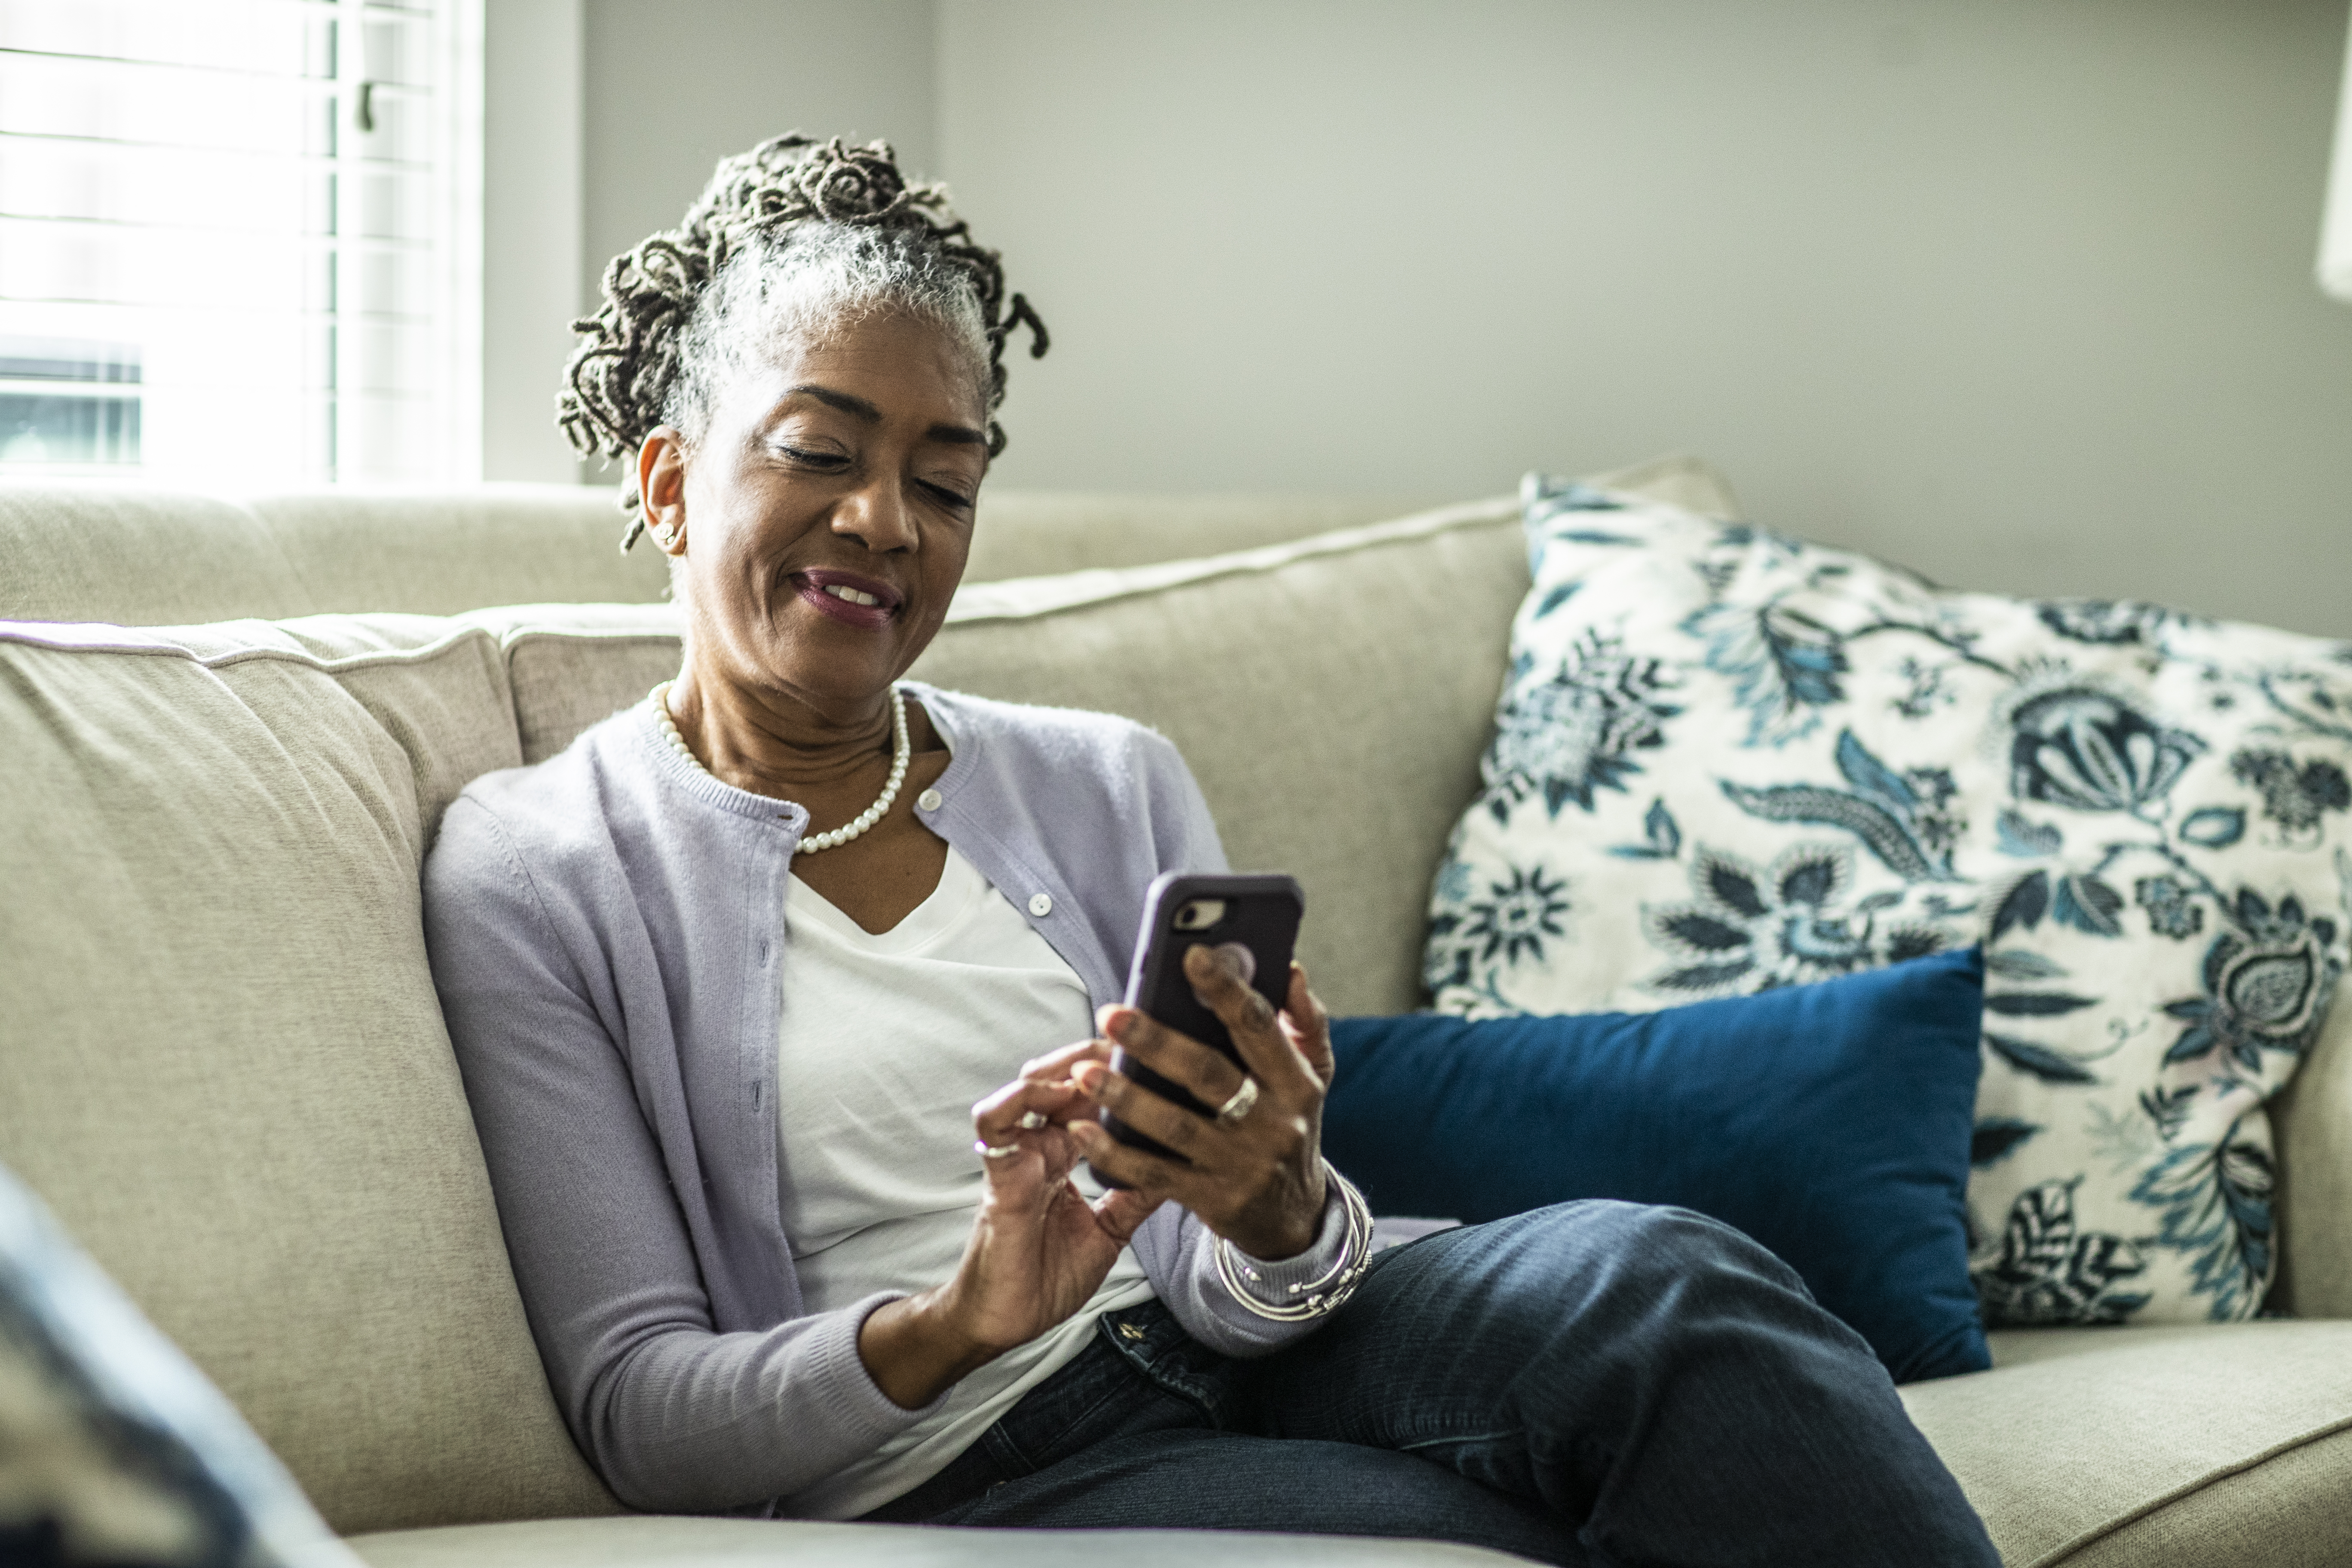 Senior woman using smartphone in living room of suburban home | Source: Getty Images